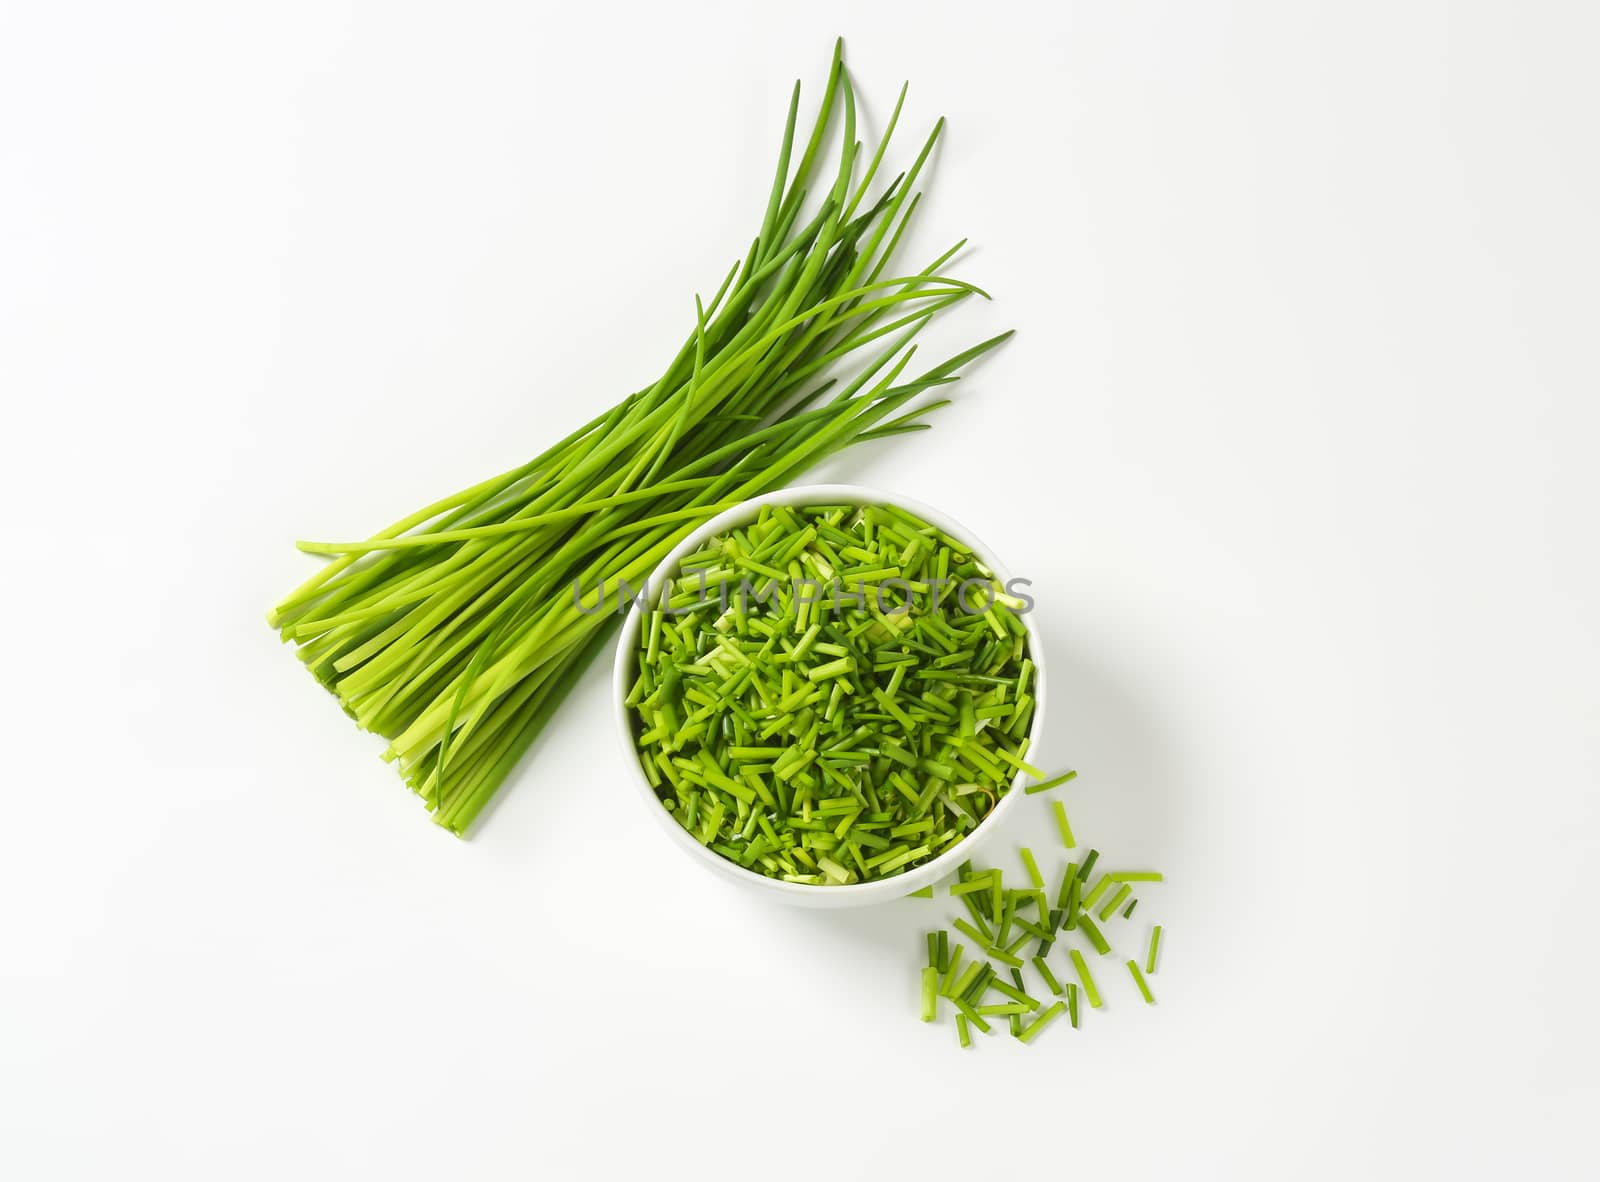 Fresh chopped chives by Digifoodstock